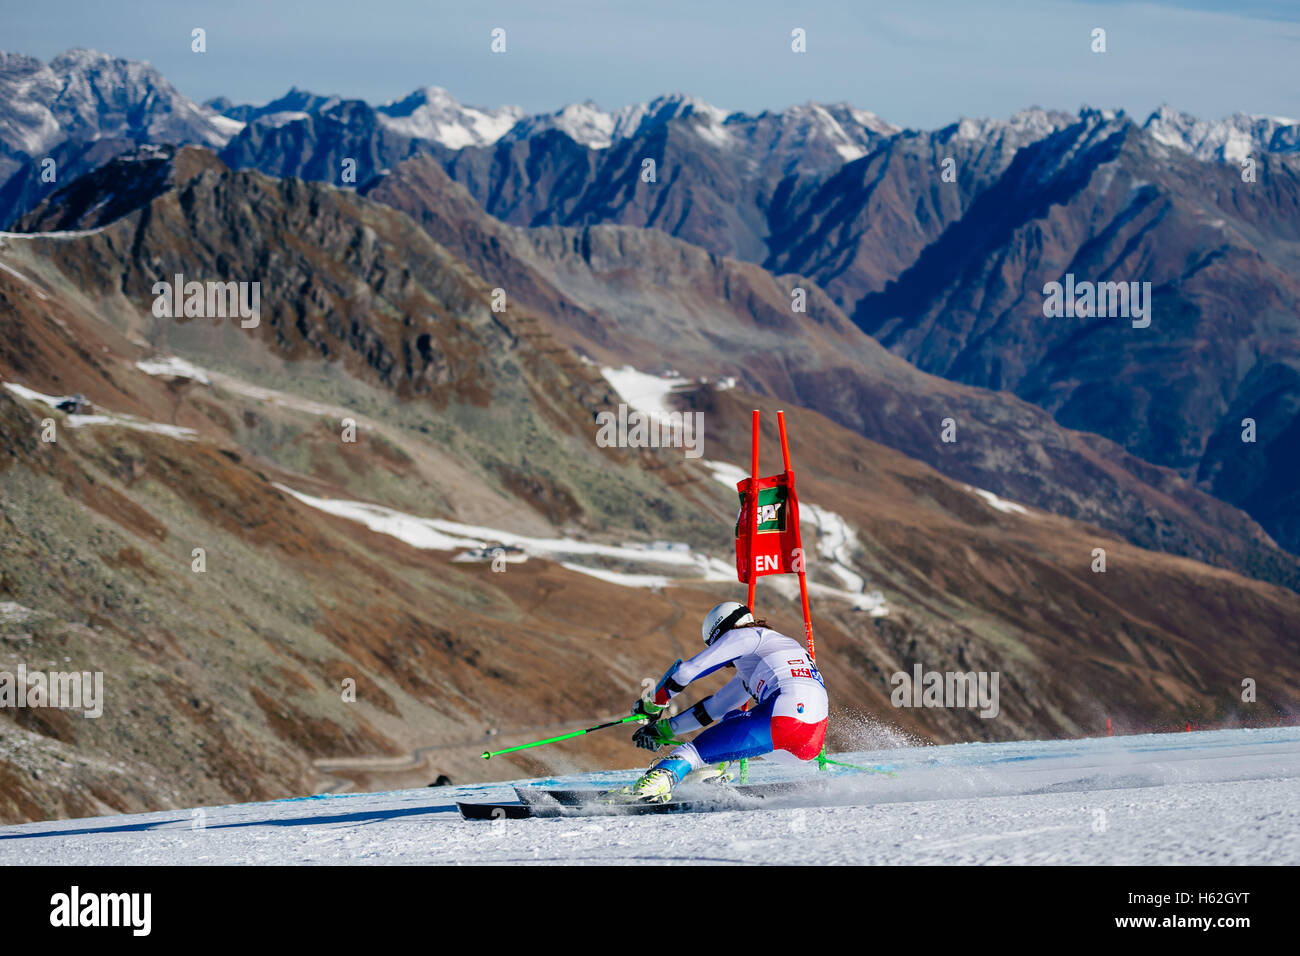 Solden, Austria. 23rd Oct, 2016. Sandro Jenal of Switzerland competes during the first run of the FIS World Cup Men's Giant Slalom race in Solden, Austria on October 23, 2016. Credit:  Jure Makovec/Alamy Live News Stock Photo